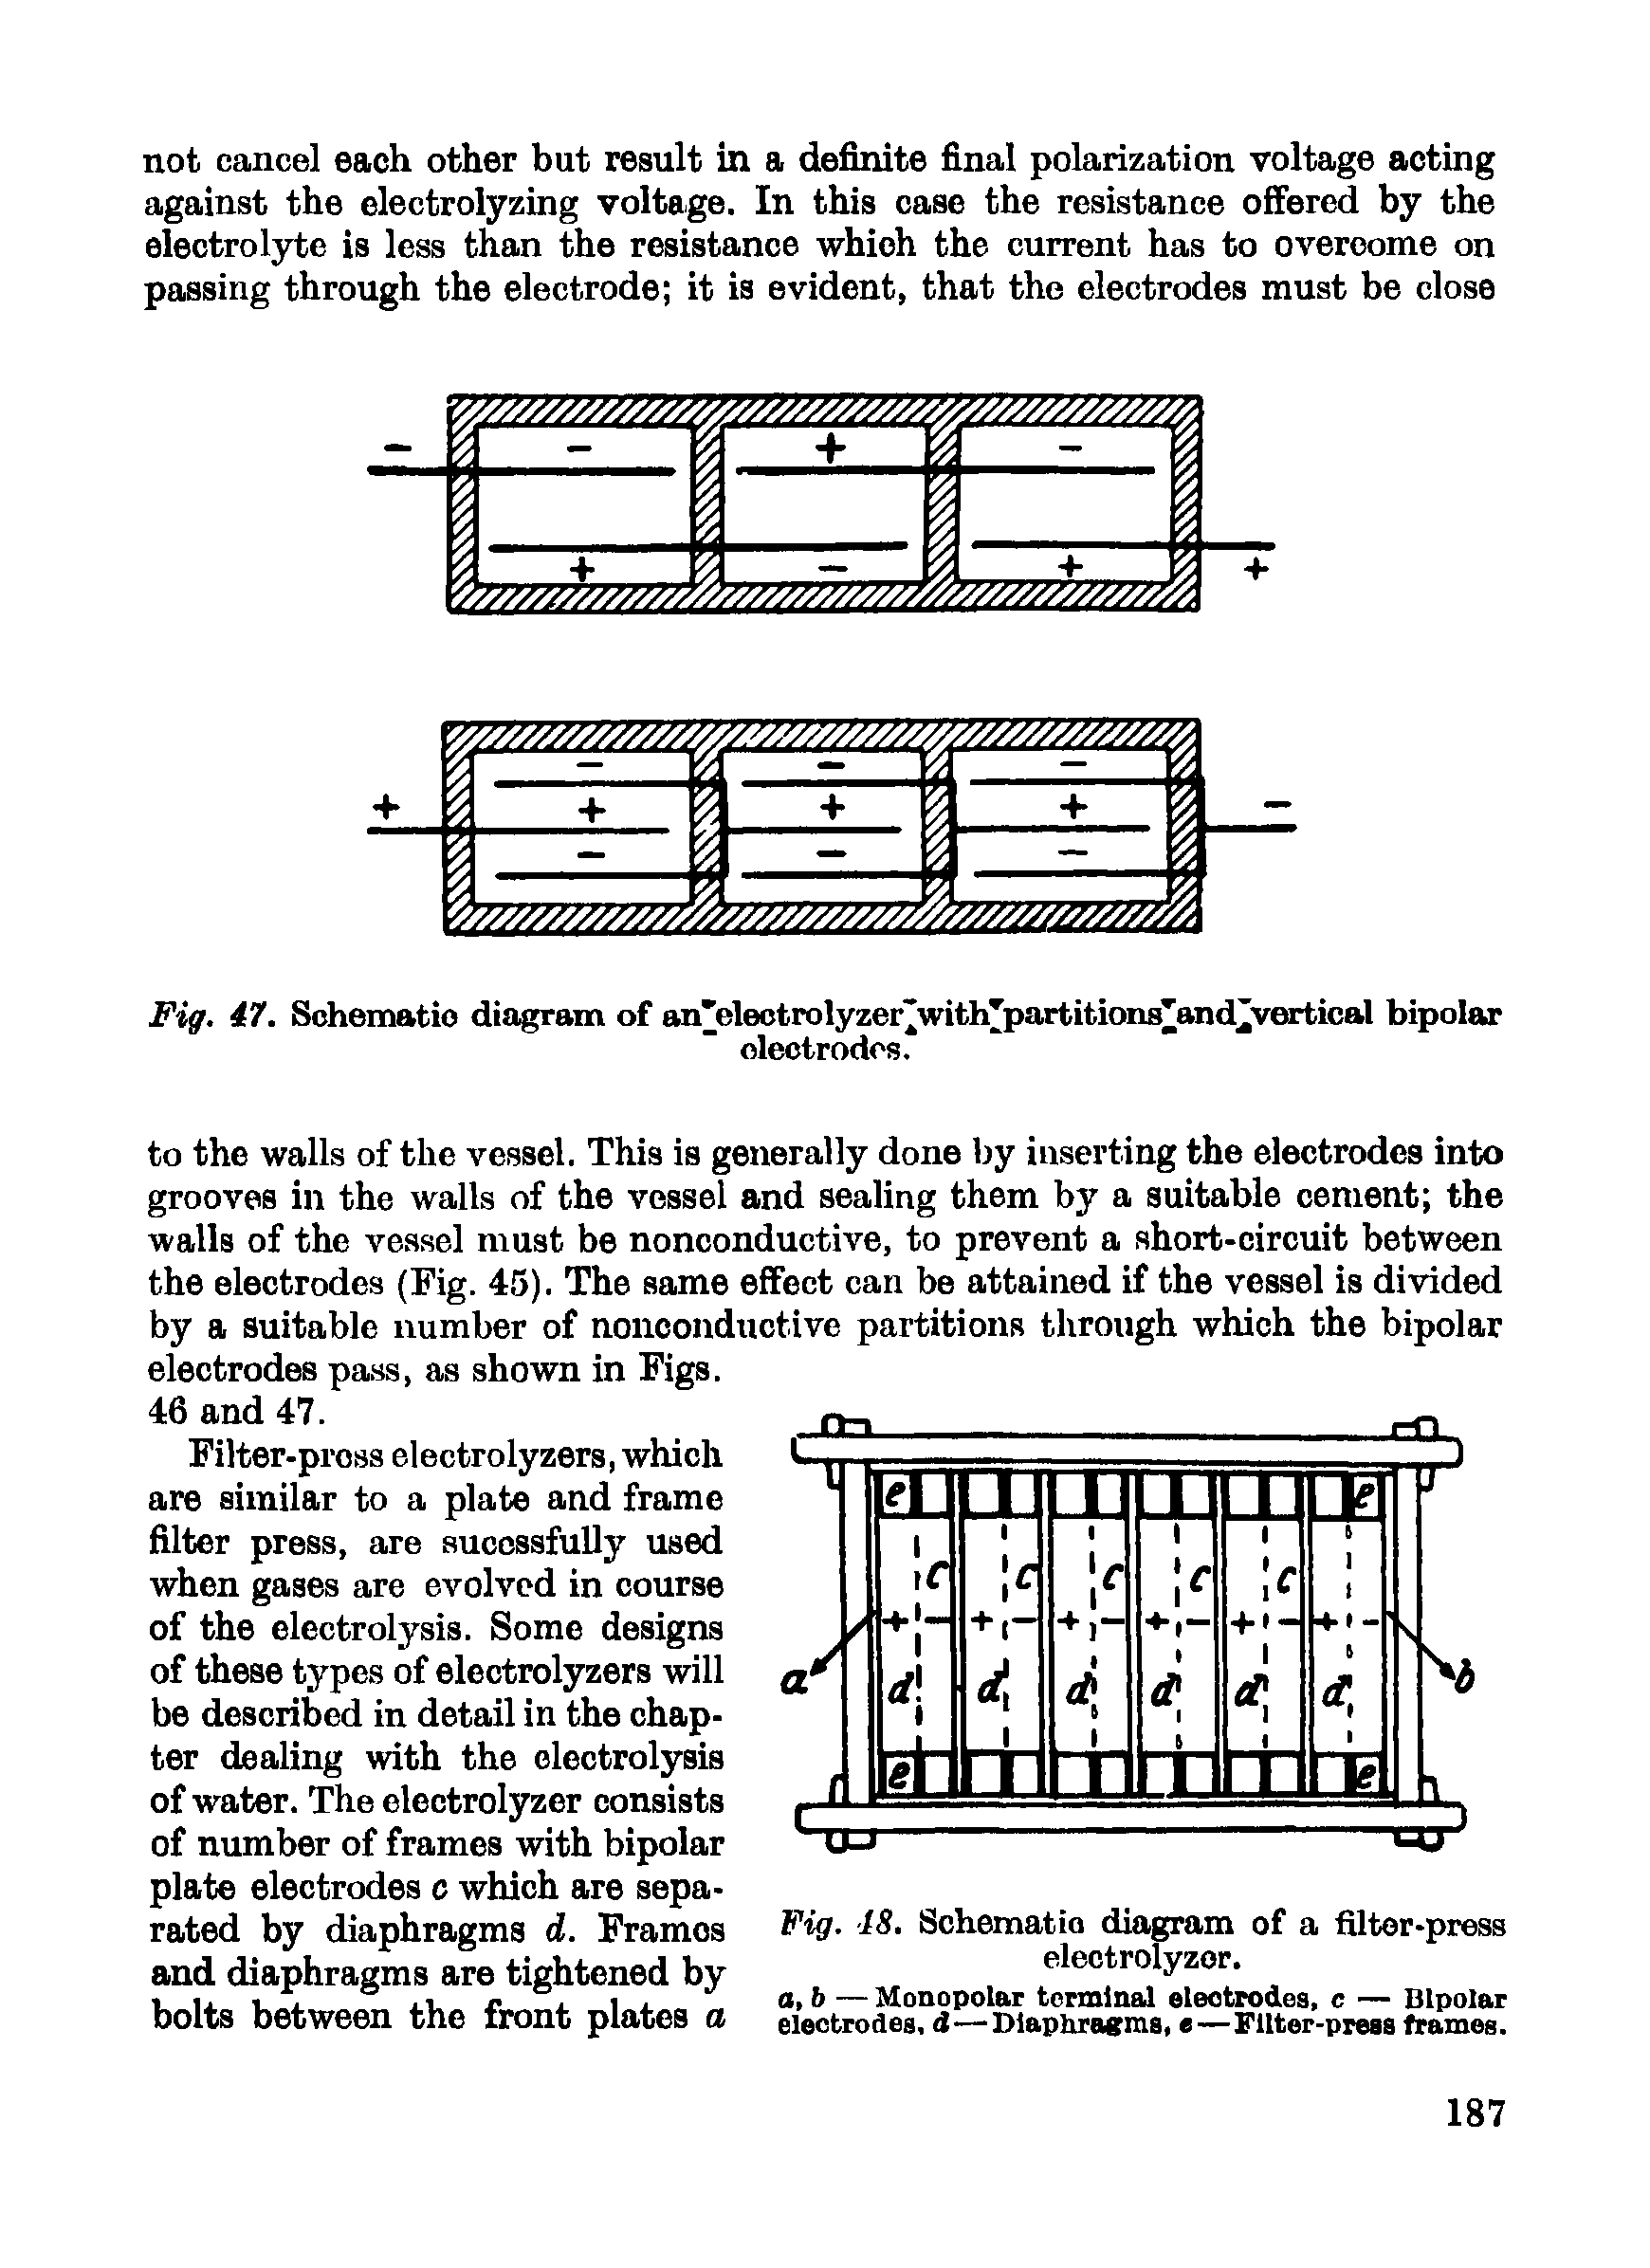 Fig. 47. Schematic diagram of an electrolyzer with"partitions and vertical bipolar...